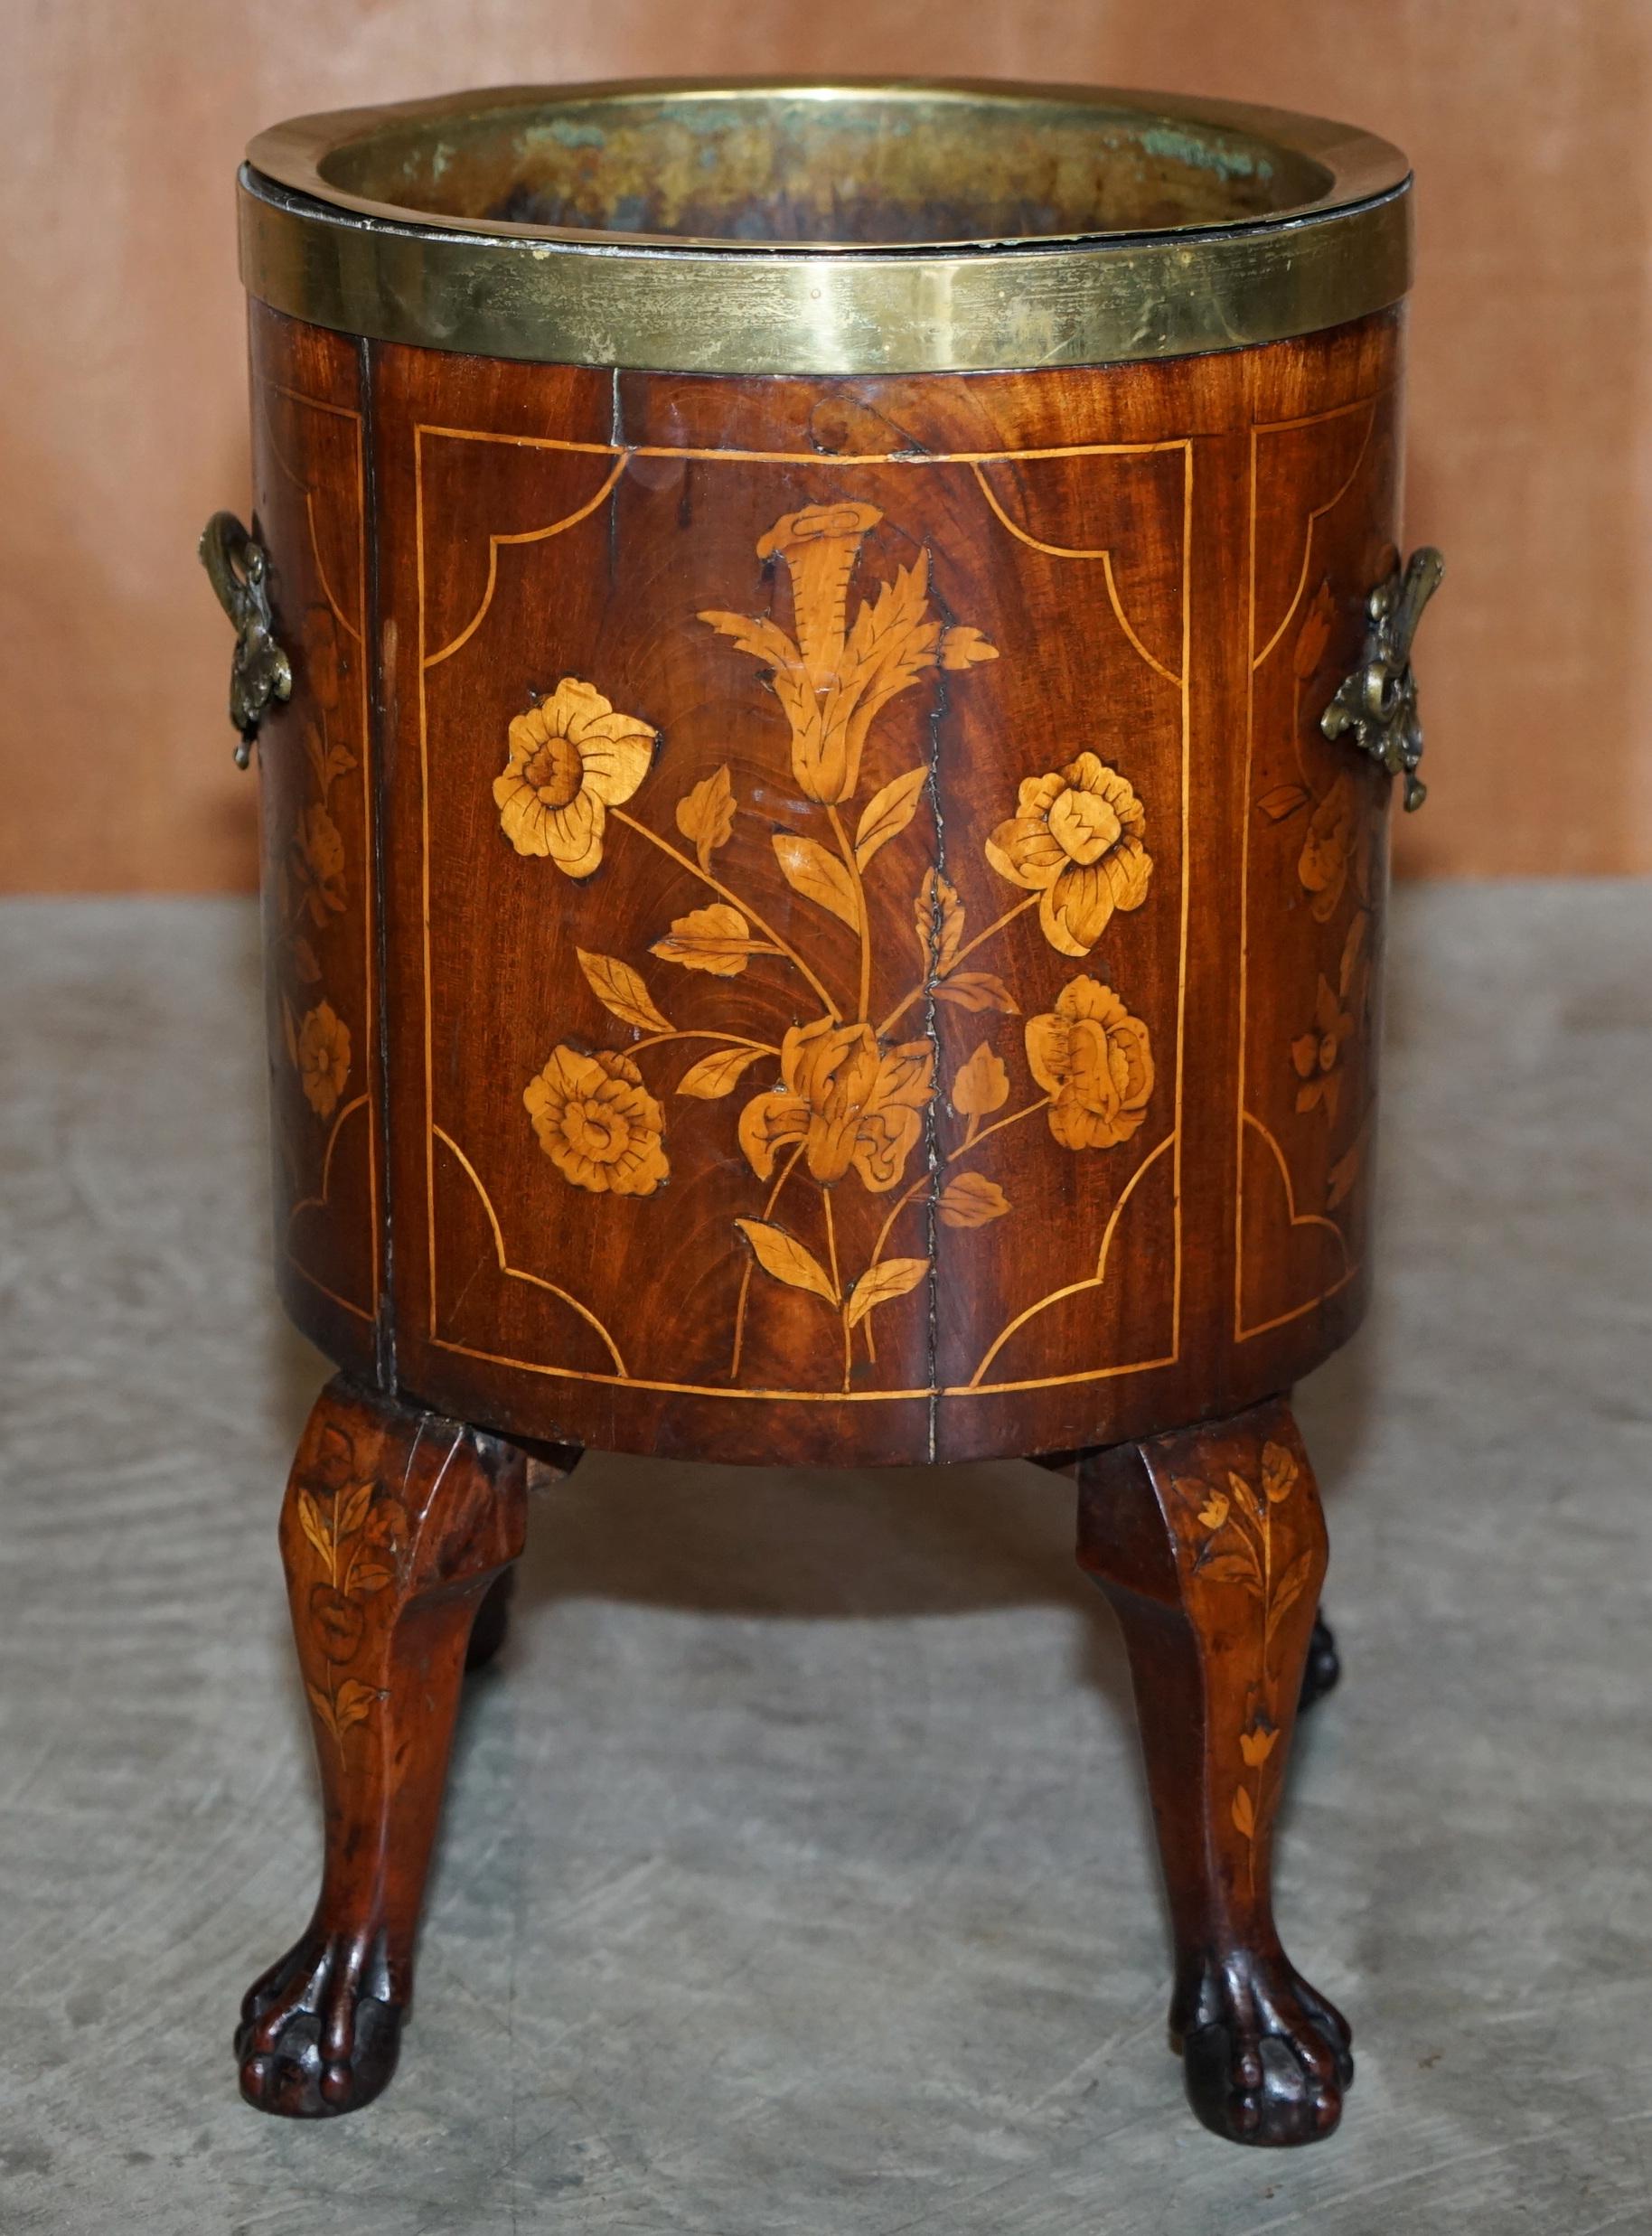 Exquisite Antique circa 1800 Dutch Inlaid Wine Cooler Bucket Claw & Ball Feet For Sale 3